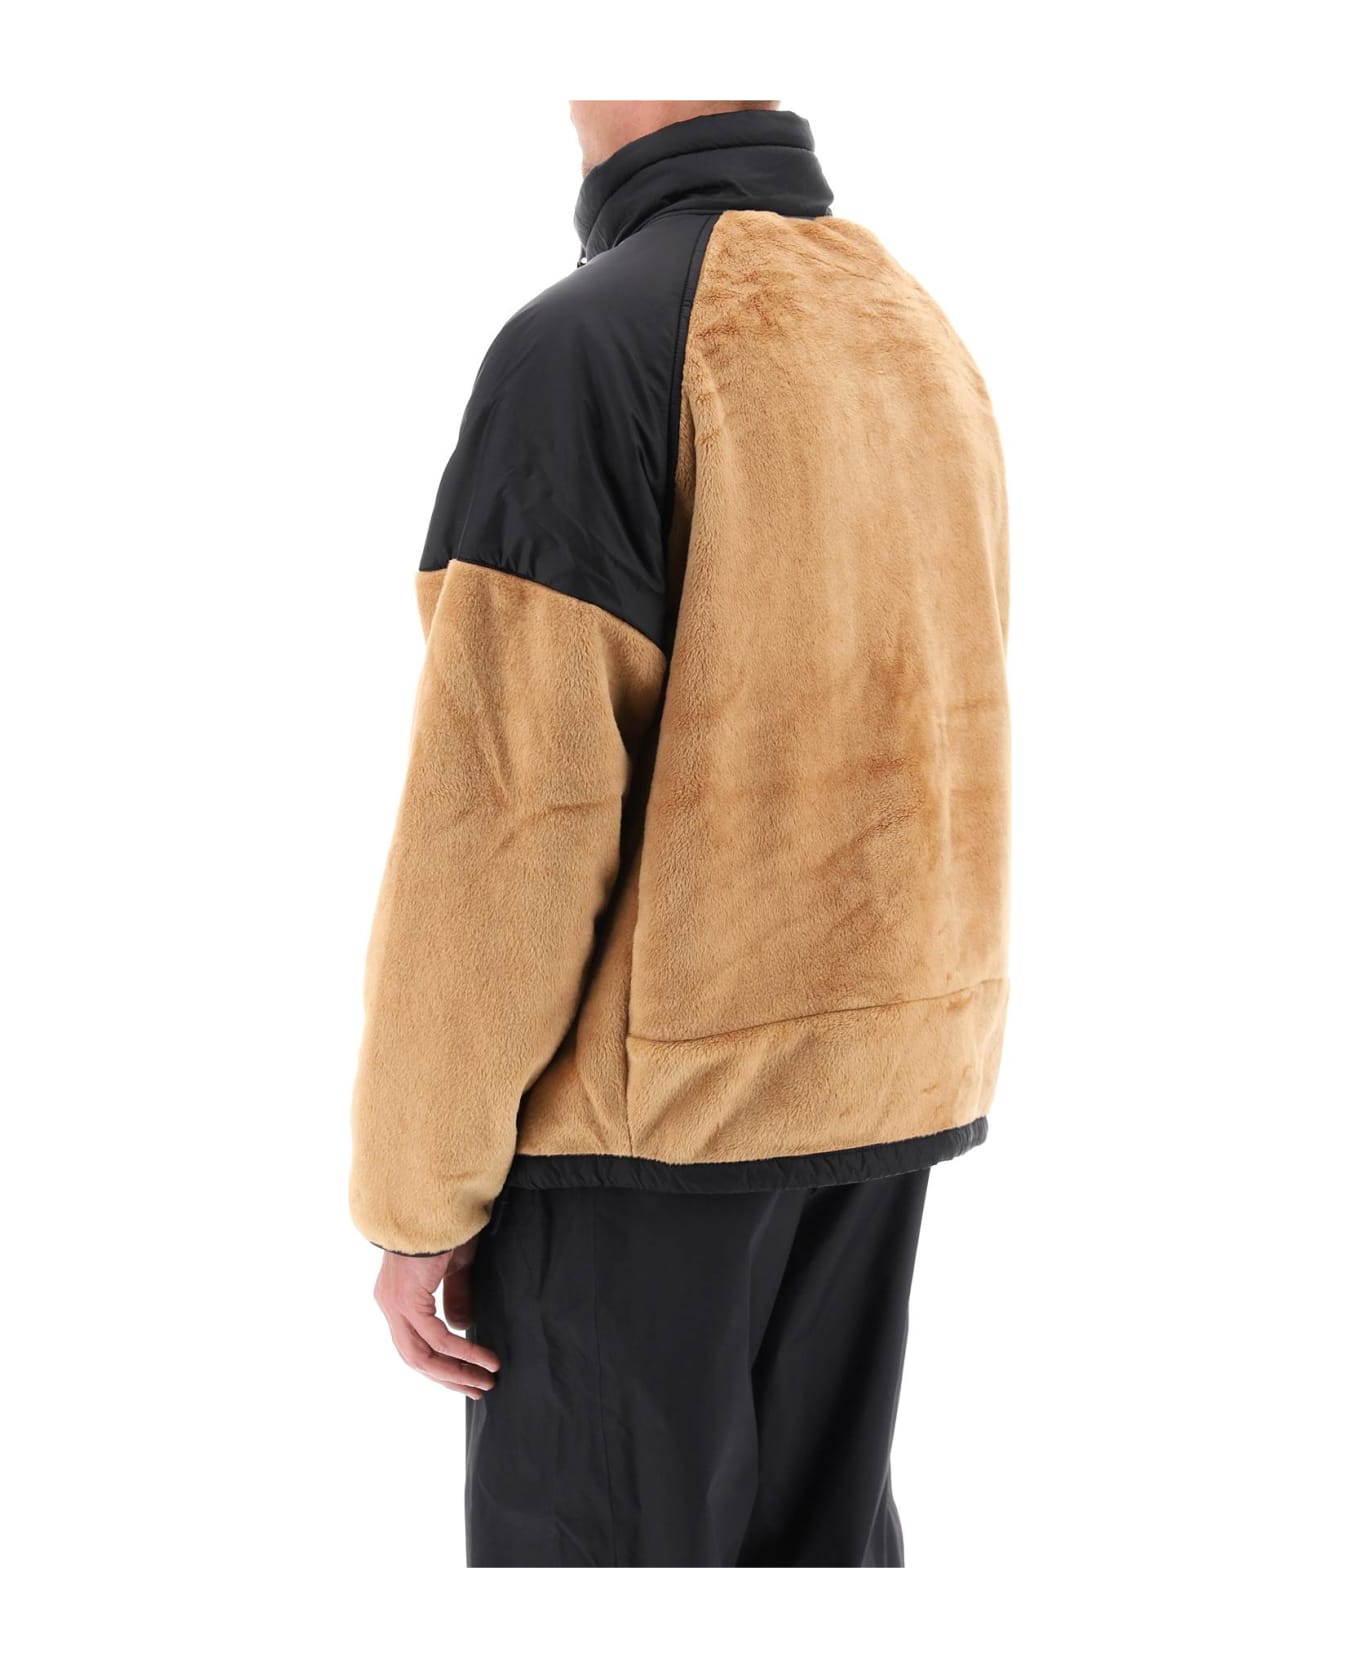 The North Face Fleece Jacket With Nylon Inserts - ALMOND BUTTERTNF BLACK (Beige)